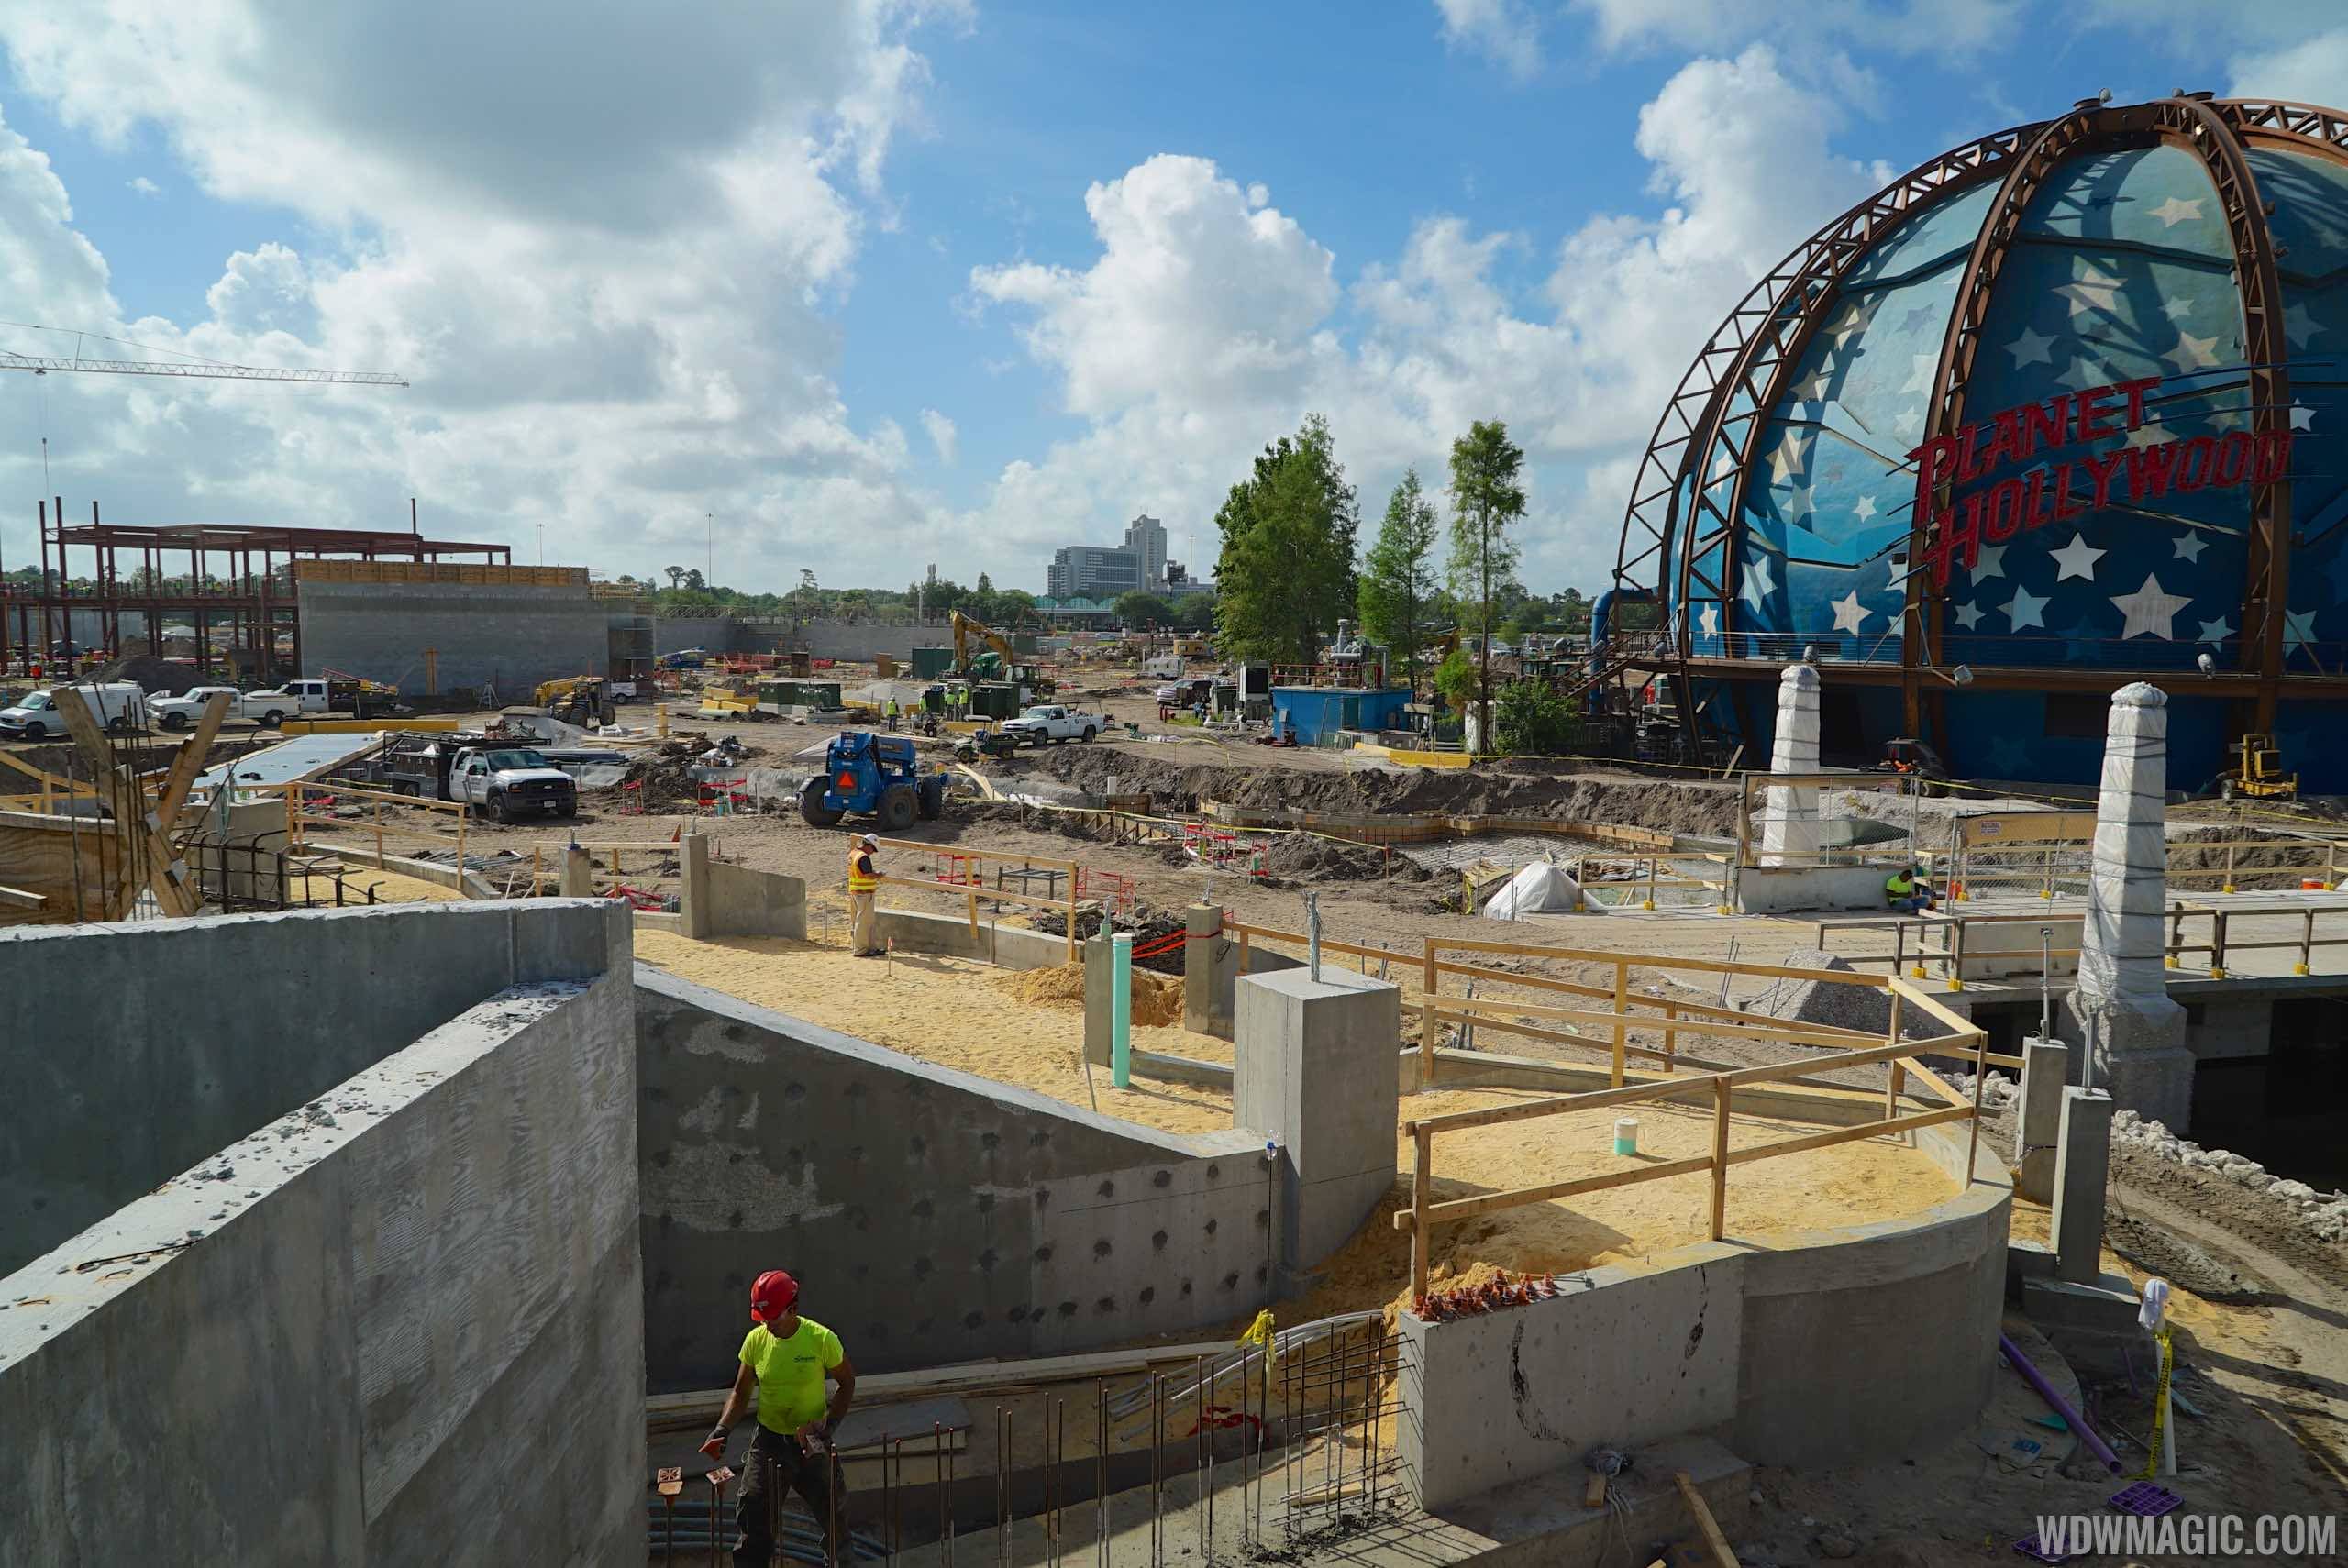 The Springs construction at Disney Springs